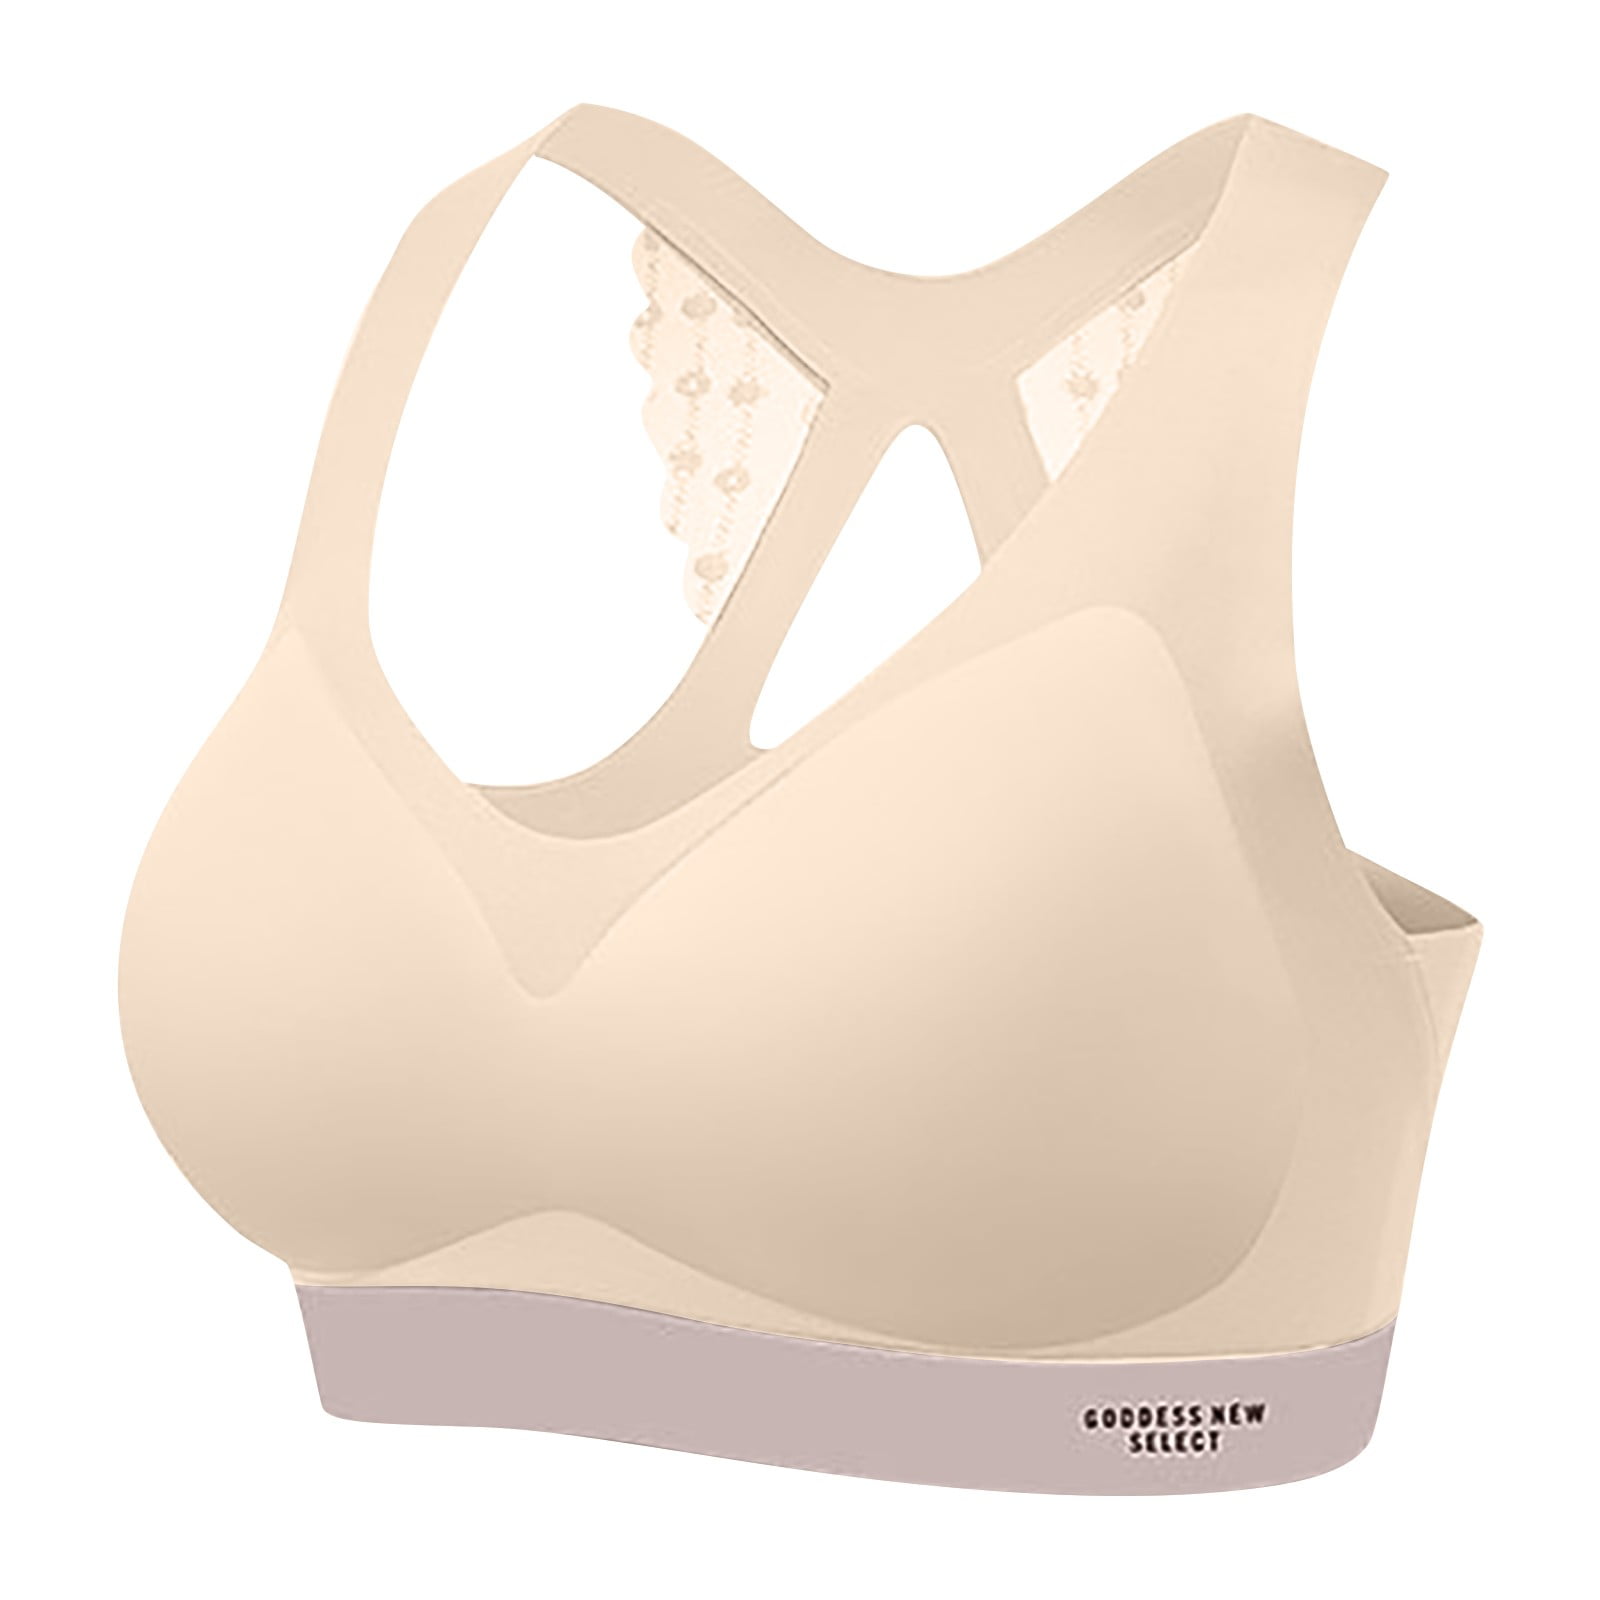 CAICJ98 Women'S Lingerie Womens Sports Bra No Wire Comfort Sleep Bra Plus  Size Workout Activity Bras with Non Removable Pads Shaping Bra White,5XL 